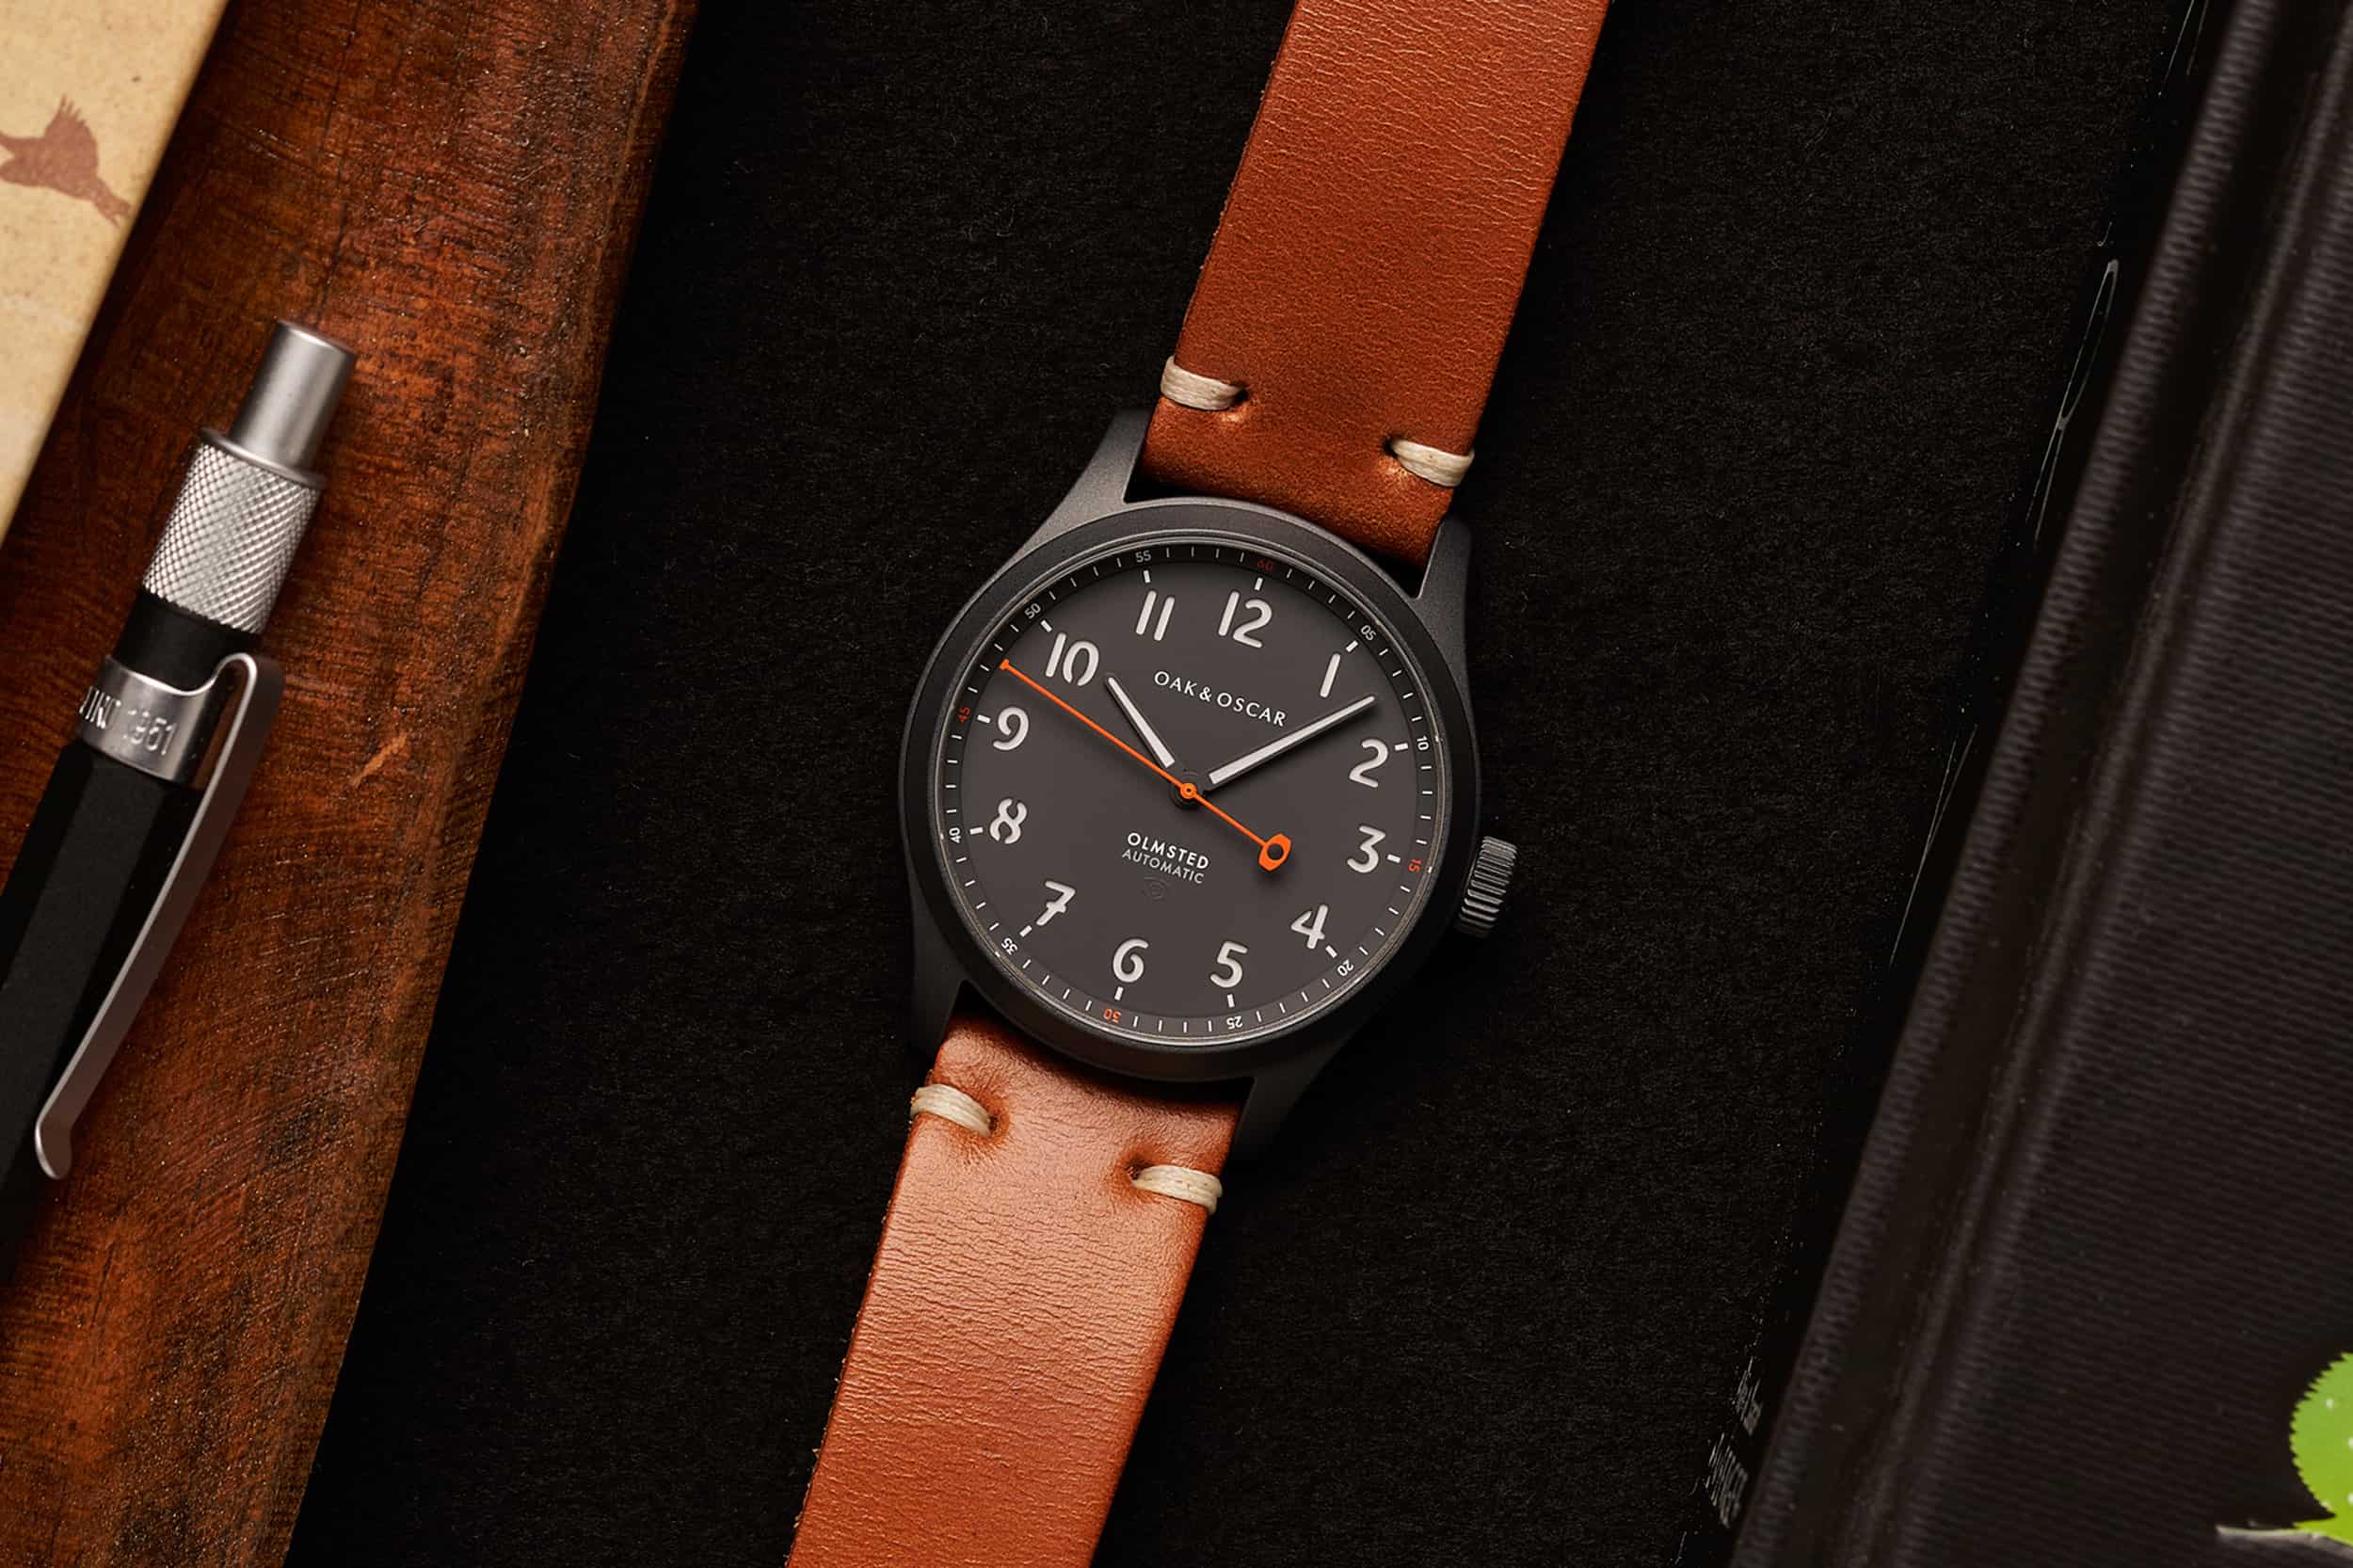 Oak & Oscar Introduce the Olmsted Matte, with a Sleek Ceramic Coated Case